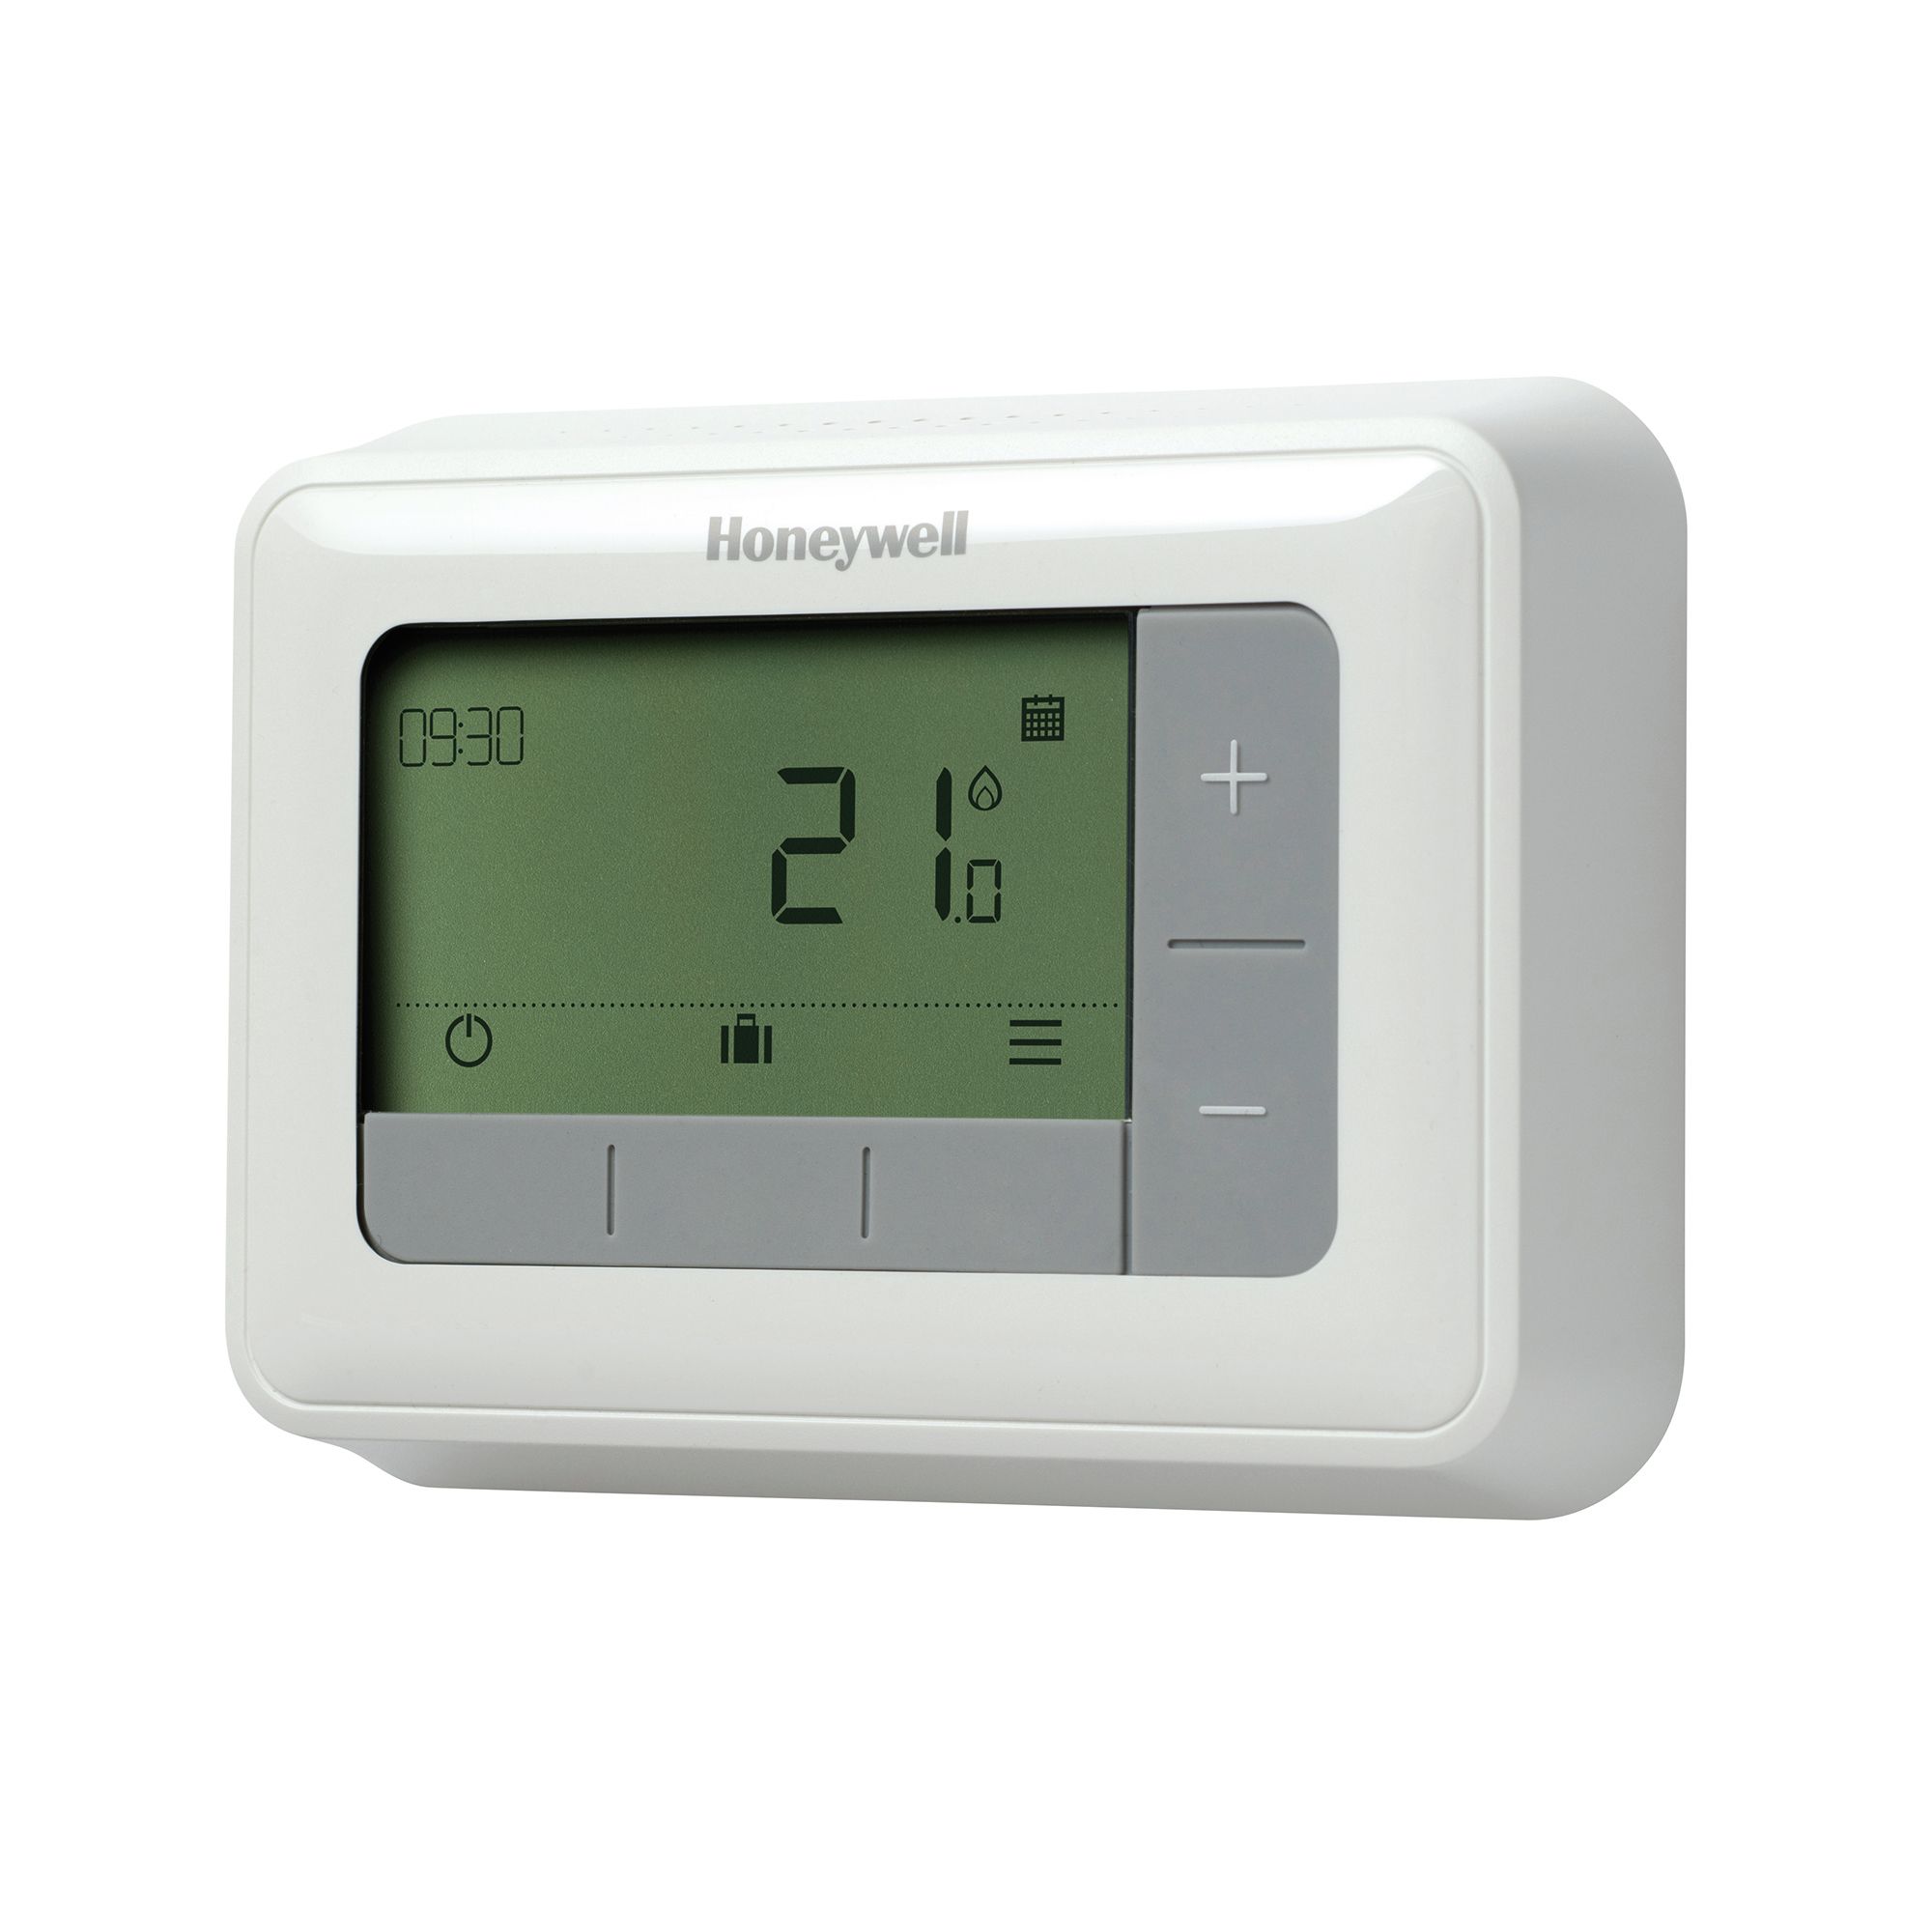 https://media.diy.com/is/image/Kingfisher/honeywell-t4-battery-powered-wired-room-thermostat~5025121381215_01c?$MOB_PREV$&$width=768&$height=768